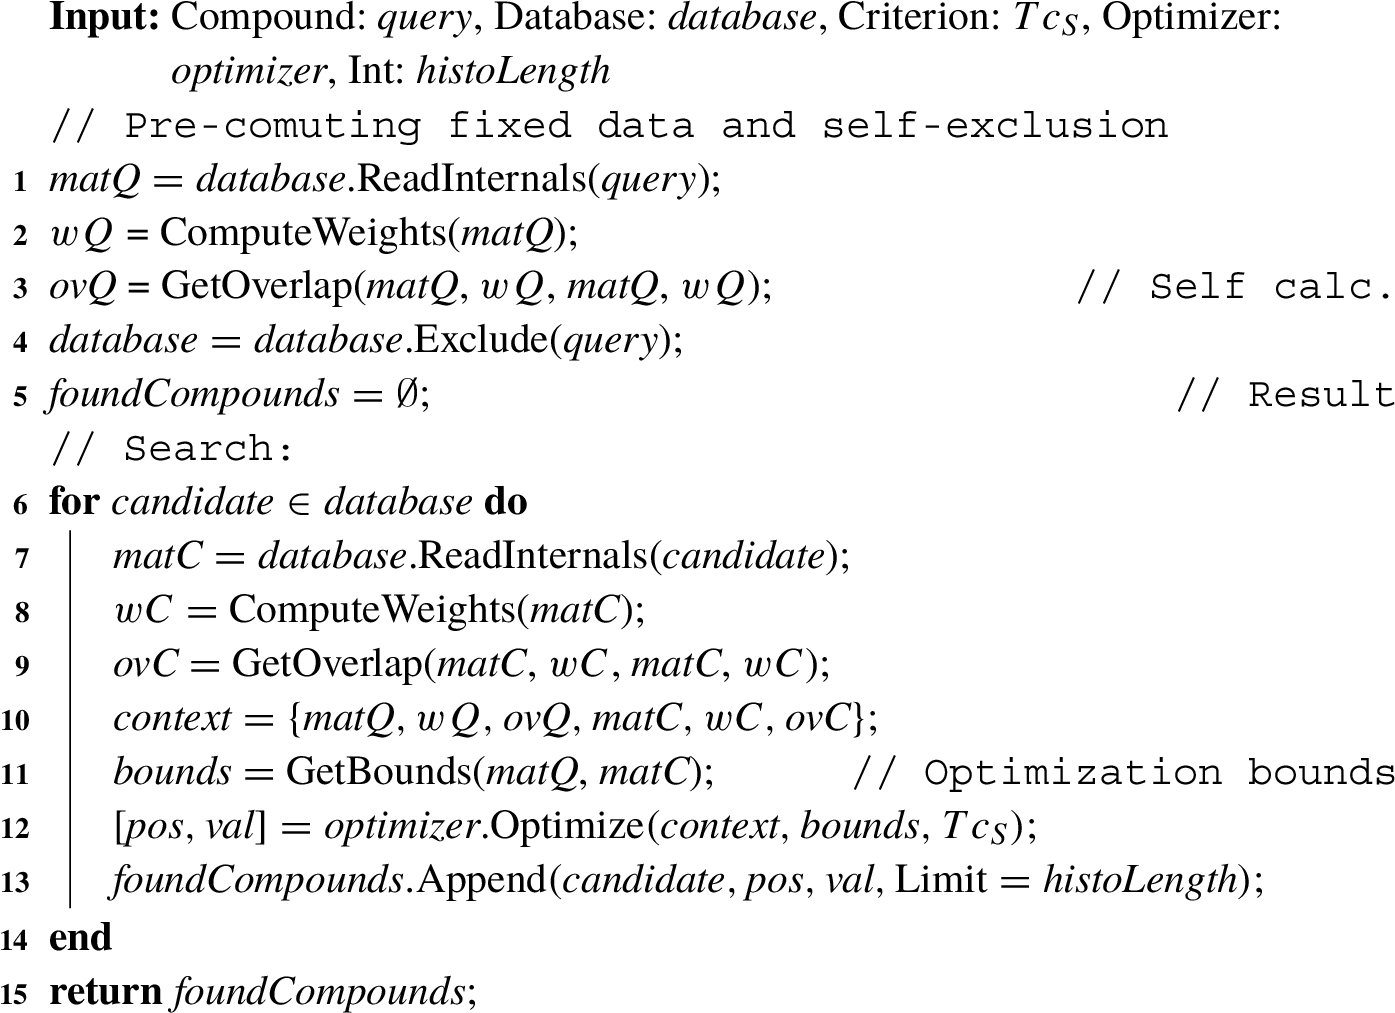 Standard process for exploring a compound database: